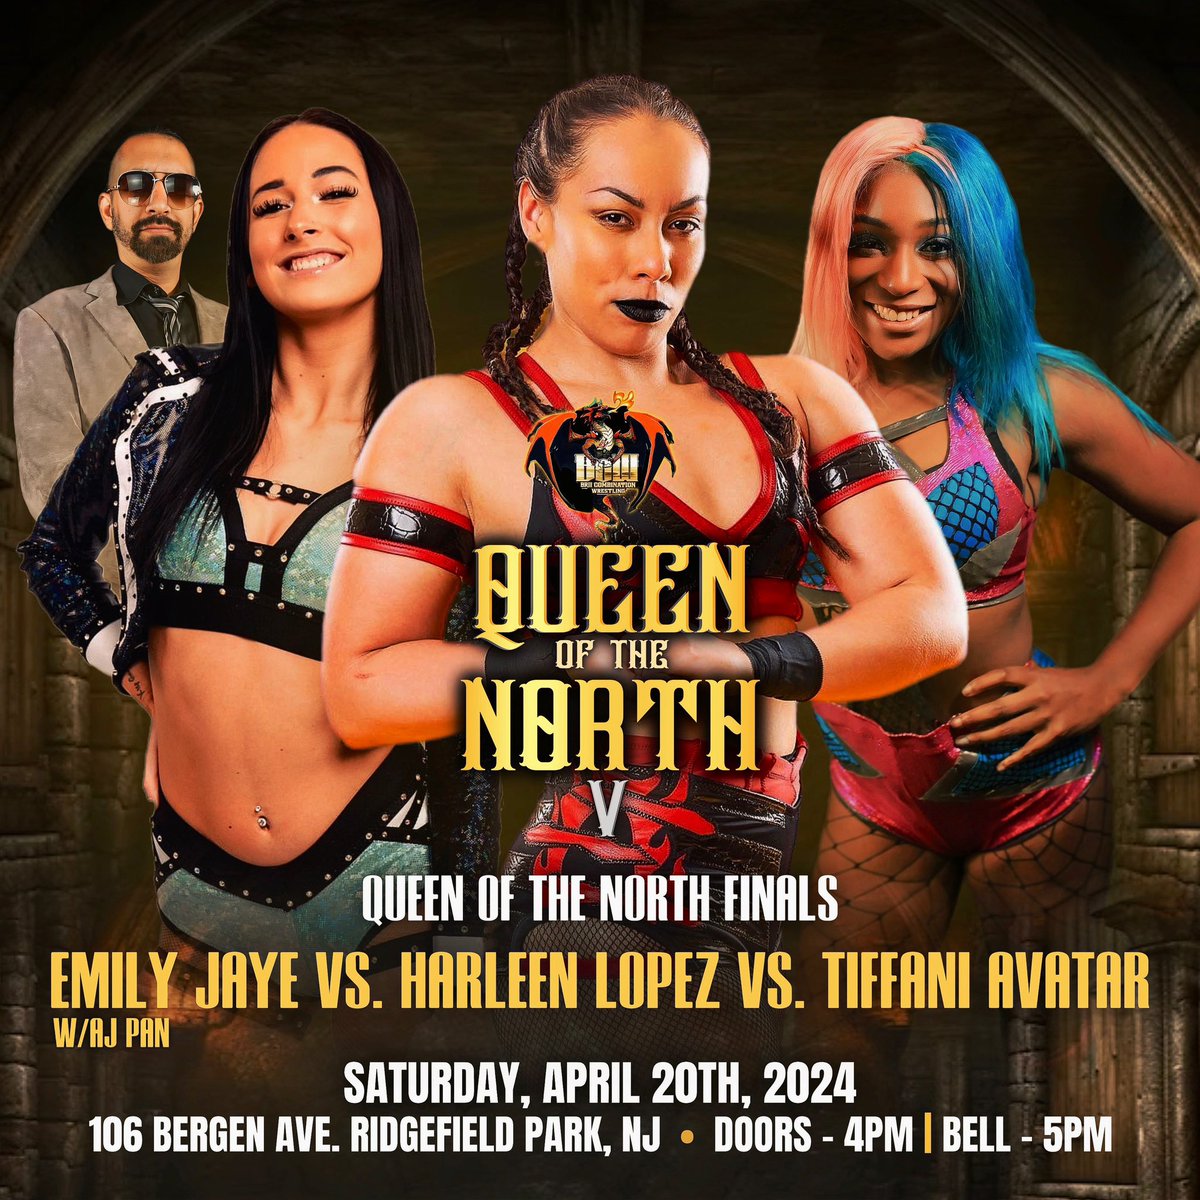 While @BCW_Wrestling_ is my main priority, I have neglected The PCA to the point where I need to get my house in order. I’m disappointed with a lot internally but I’m thrilled to be reunited with @Ray_lyn and so proud of how far @emilyjayepro has come.